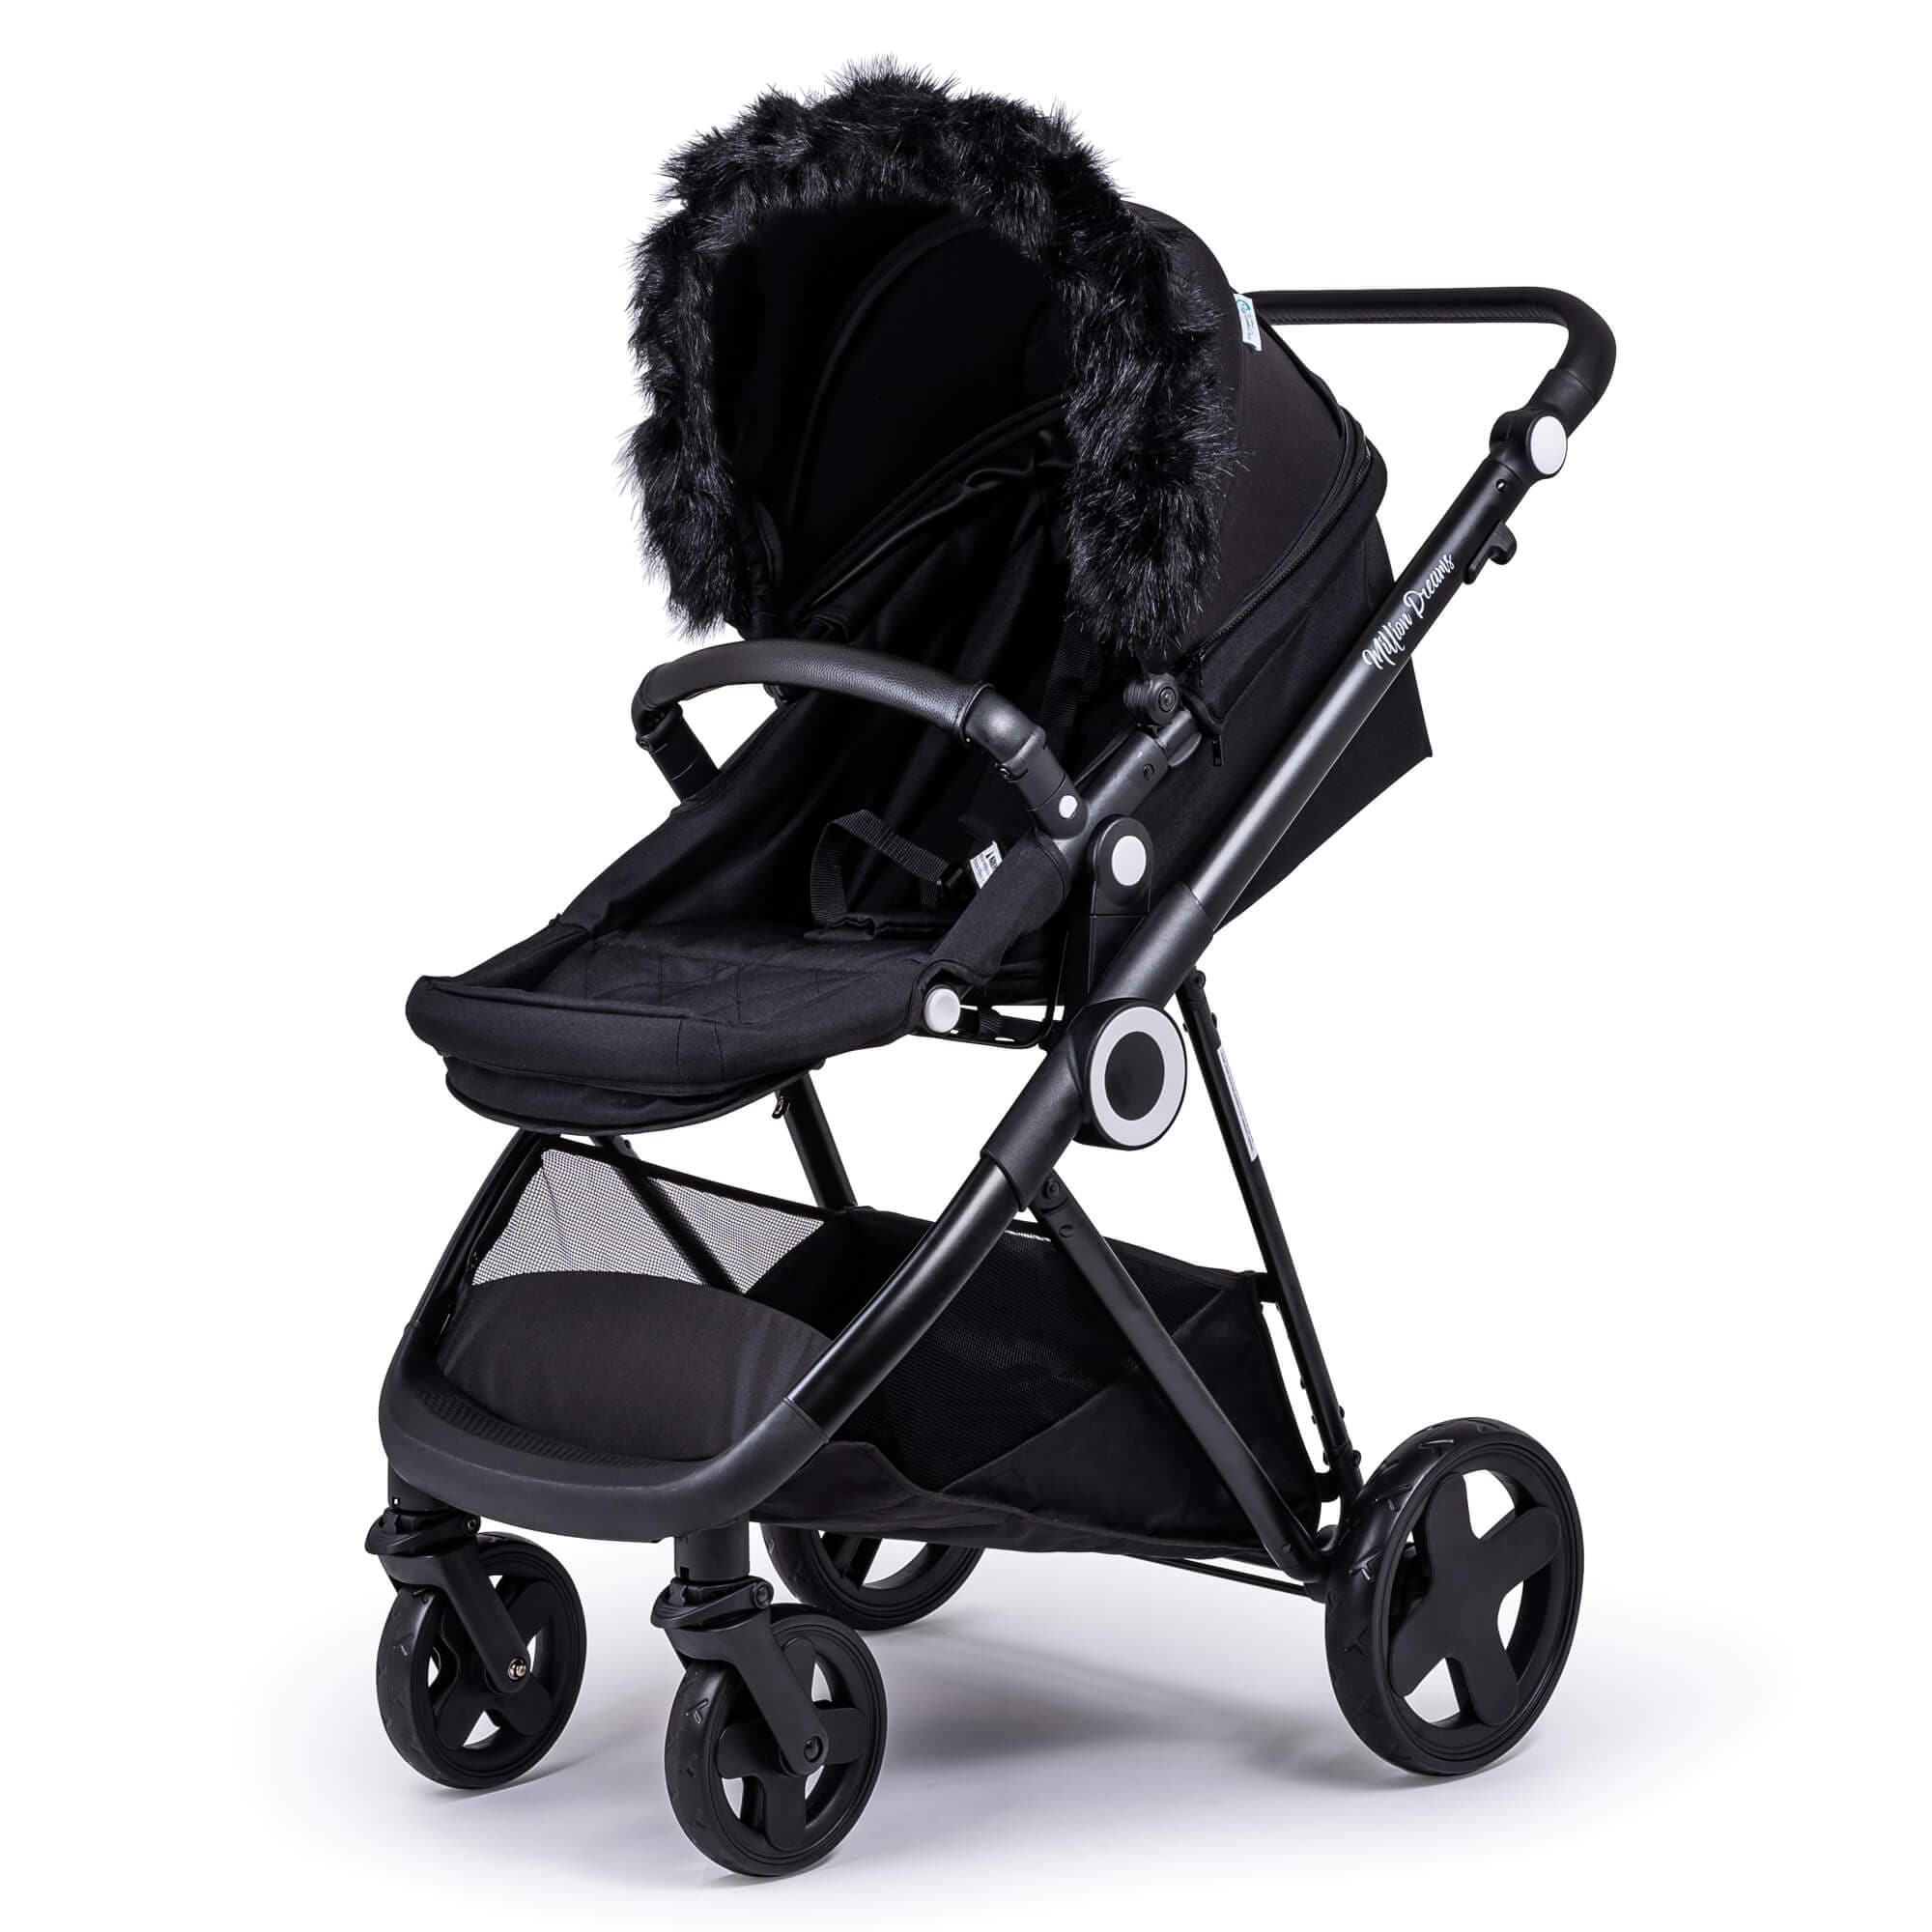 Pram Fur Hood Trim Attachment for Pushchair Compatible with Uppababy - For Your Little One